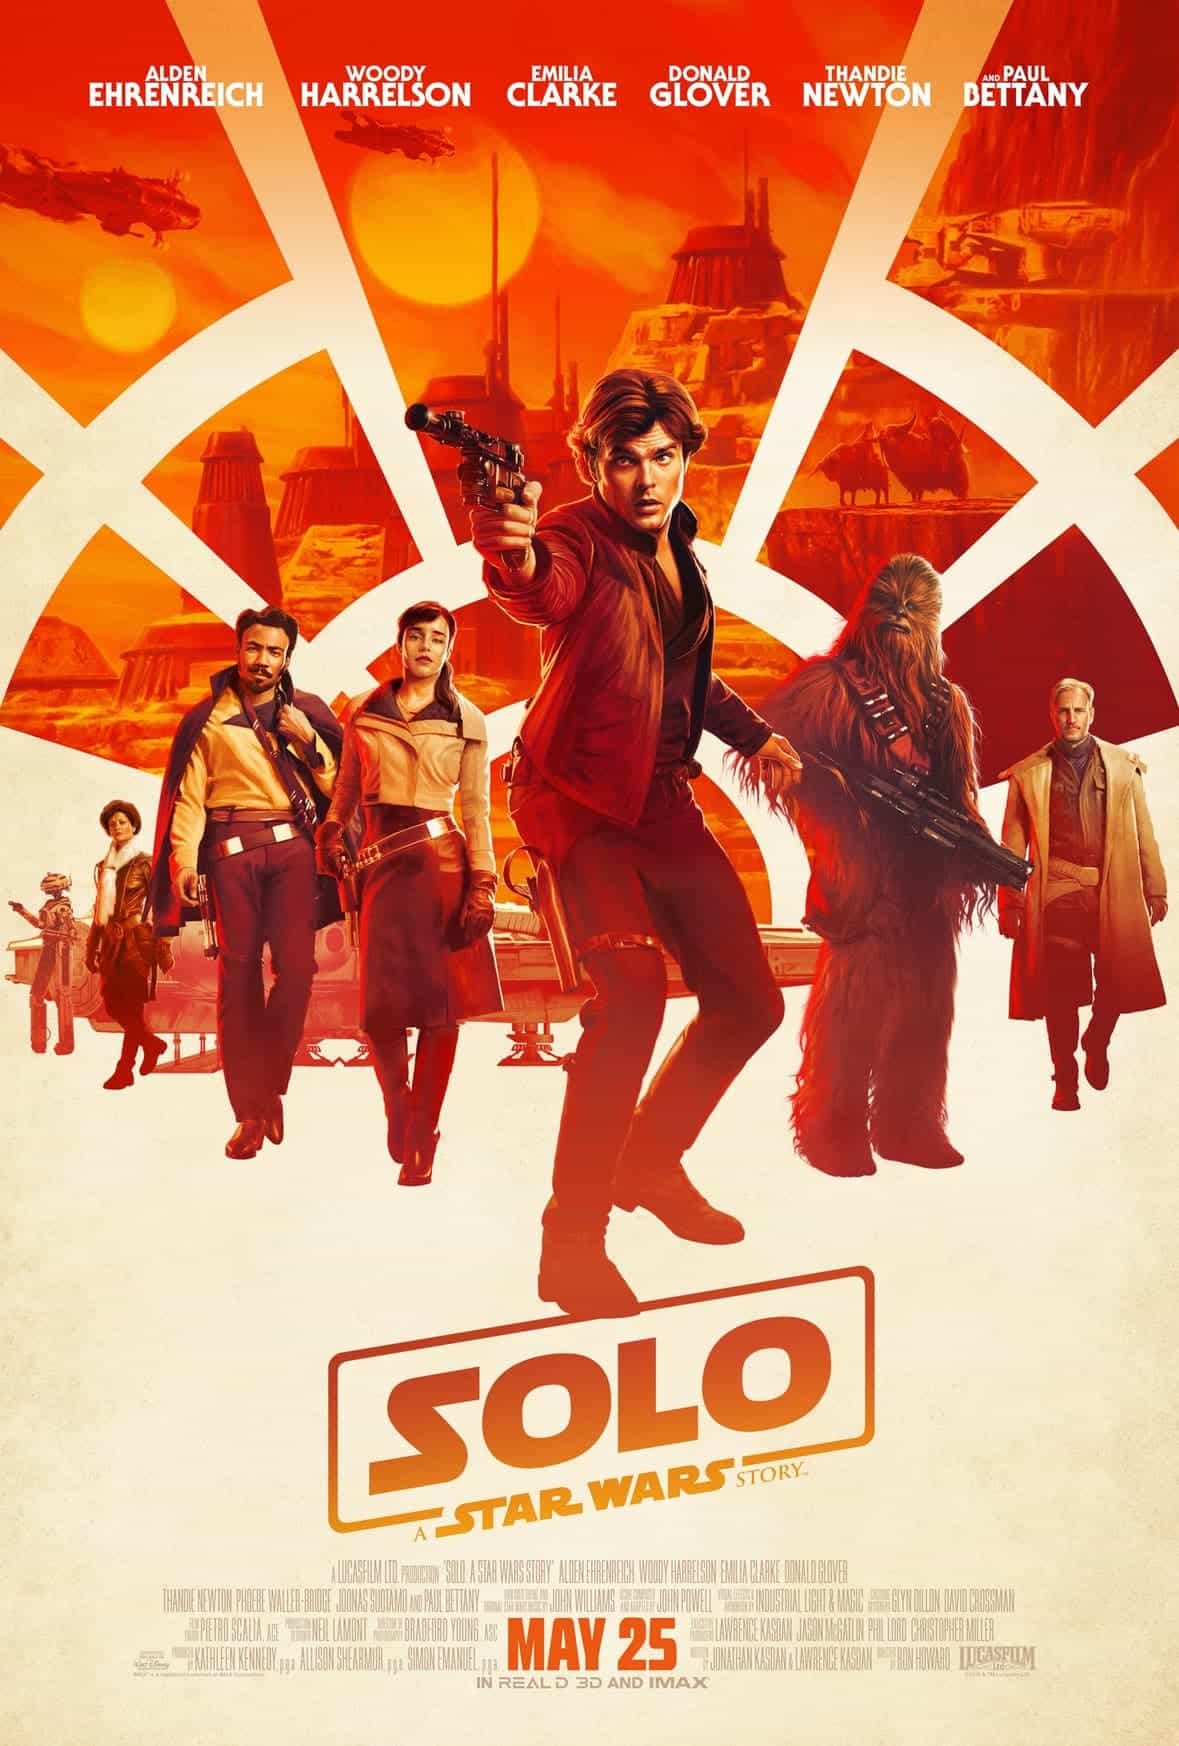 The BBFC gives Solo: A Star Wars Story a 12A rating in the UK for moderate violence